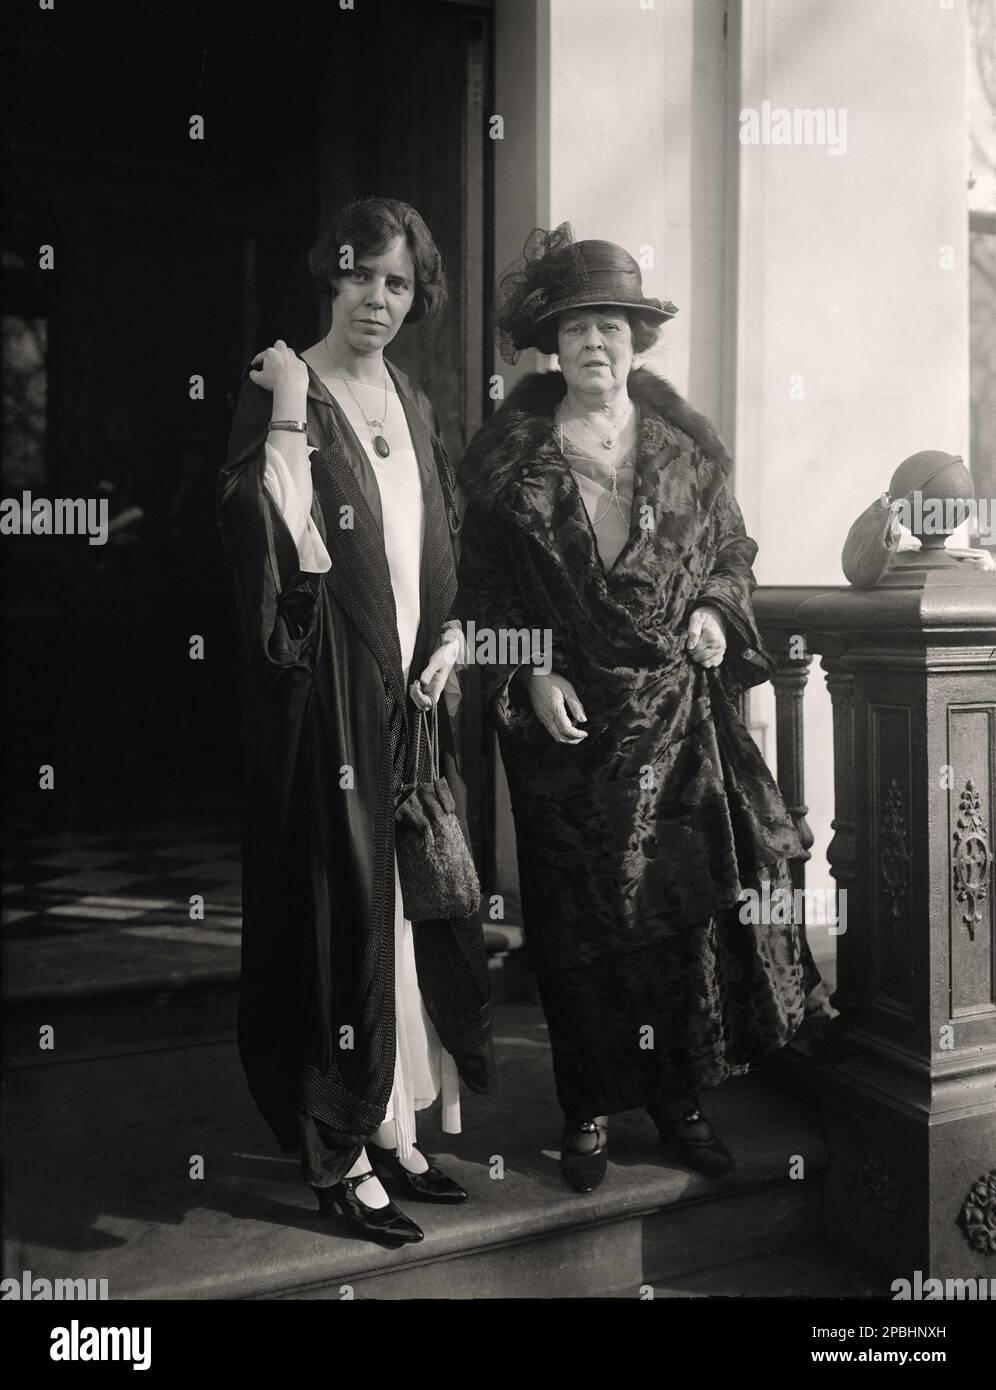 1923 , 17 november , Washington , USA :  The suffragist ALICE Stokes  PAUL ( 1885 – 1977 ) with Mrs. O.H.P.  Bellmont ( the former Mrs. William Kissam Vanderbilt ) . Alice Paul was an American suffragist leader. Along with Lucy Burns (a close friend) and others, she led a successful campaign for women's suffrage that resulted in the passage of the Nineteenth Amendment to the U.S. Constitution in 1920. The ancient , RIGHT IN THIS PHOTO, Mrs. OH.P. ( Oliver Hazard Perry ) BELMONT ( born Alva Smith ) was in first marriage the wife of rich William K. VANDERBILT Sr. and mother of CONSUELO VANDERBIL Stock Photo